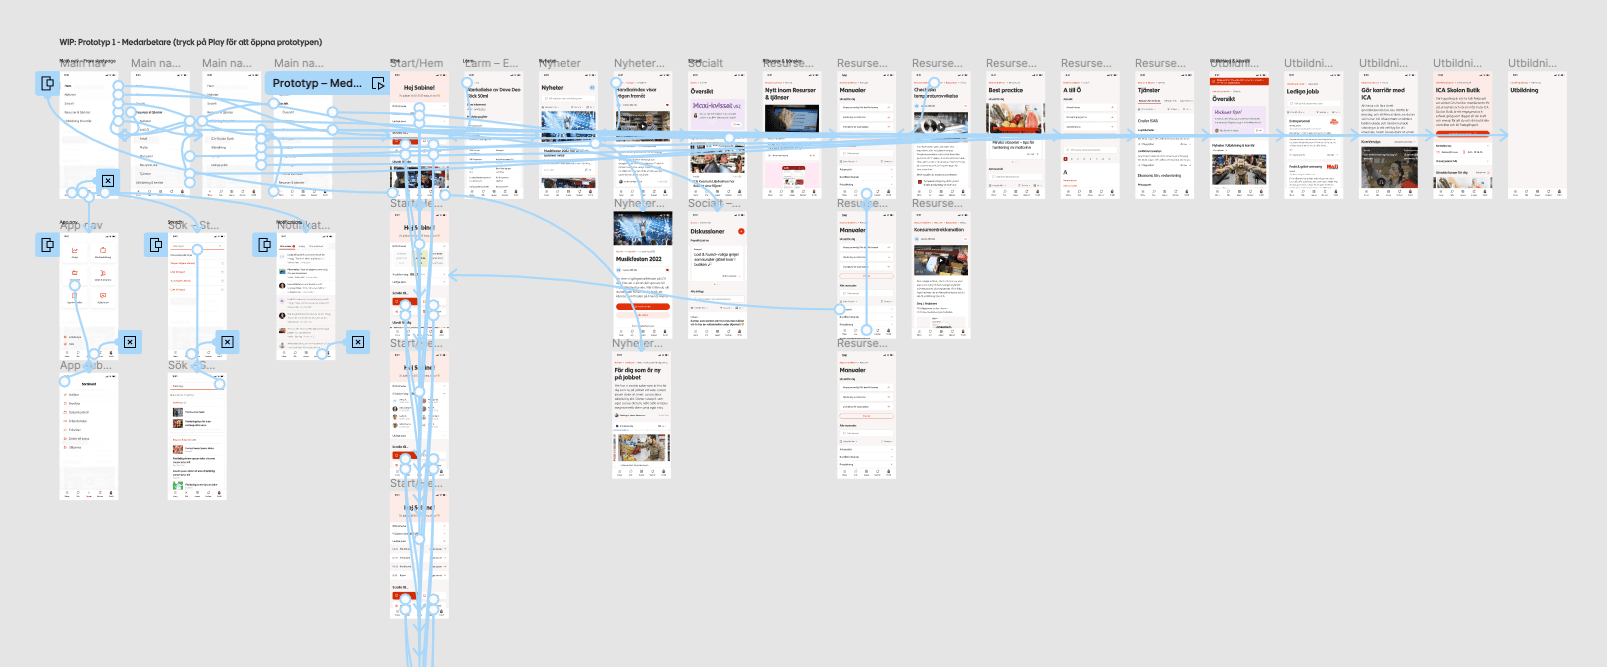 Detailed website map with a flowchart showing the navigation structure and page hierarchy of a website.